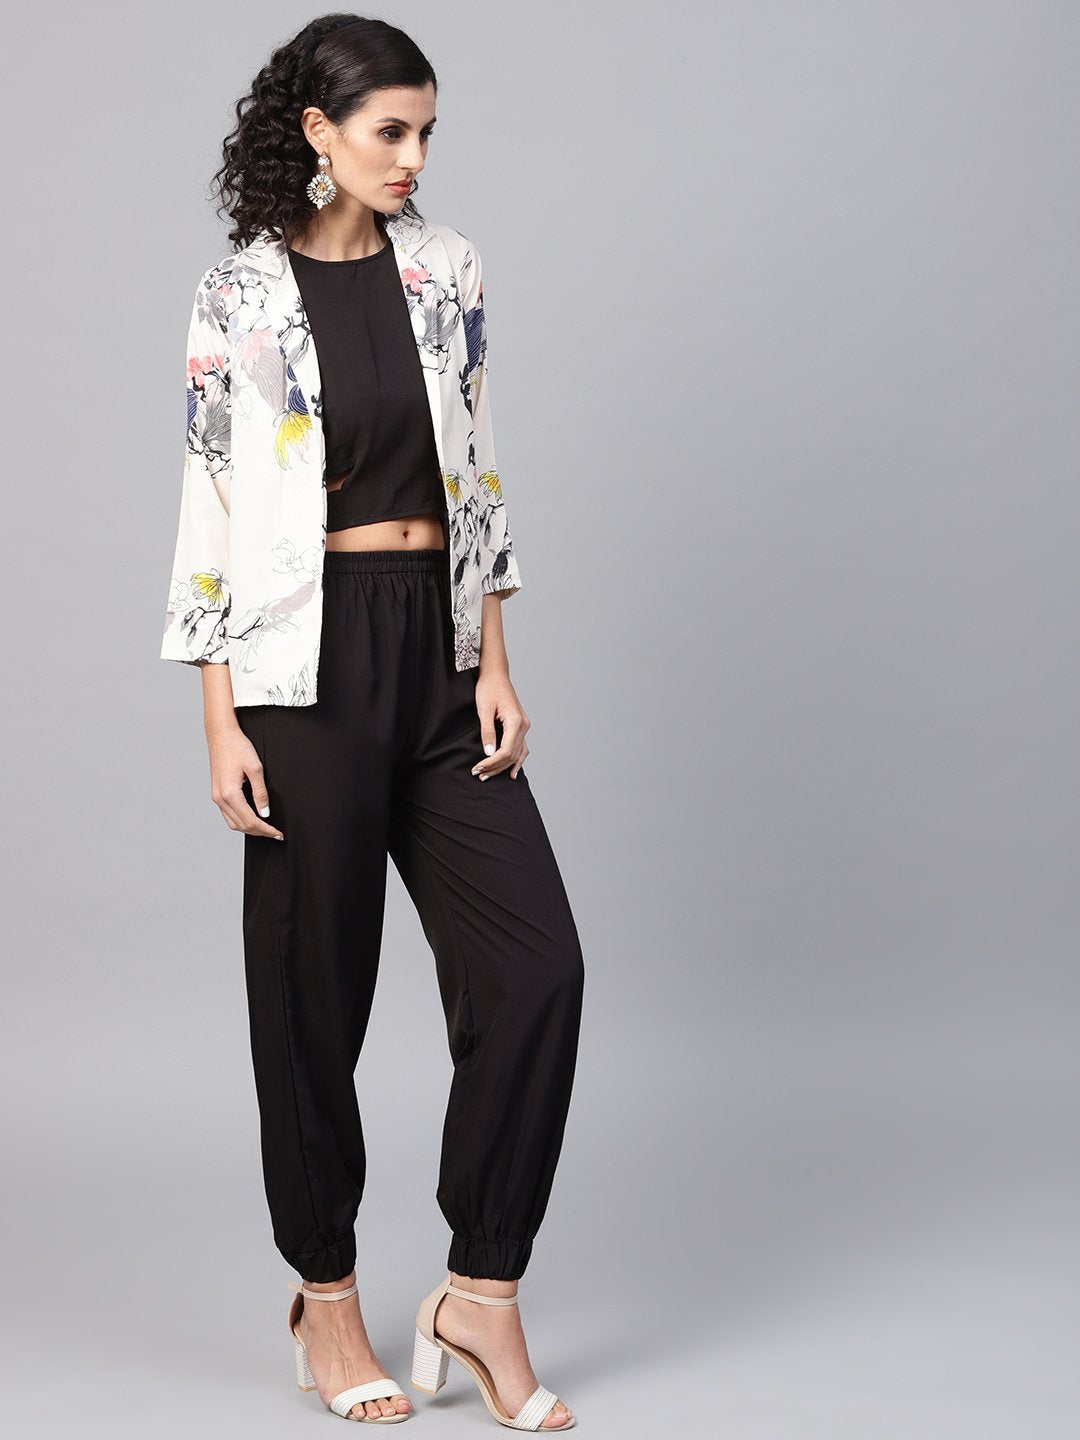 Women's Solid Black Tops And Palazzo With Cream Floral Printed Jacket - Nayo Clothing